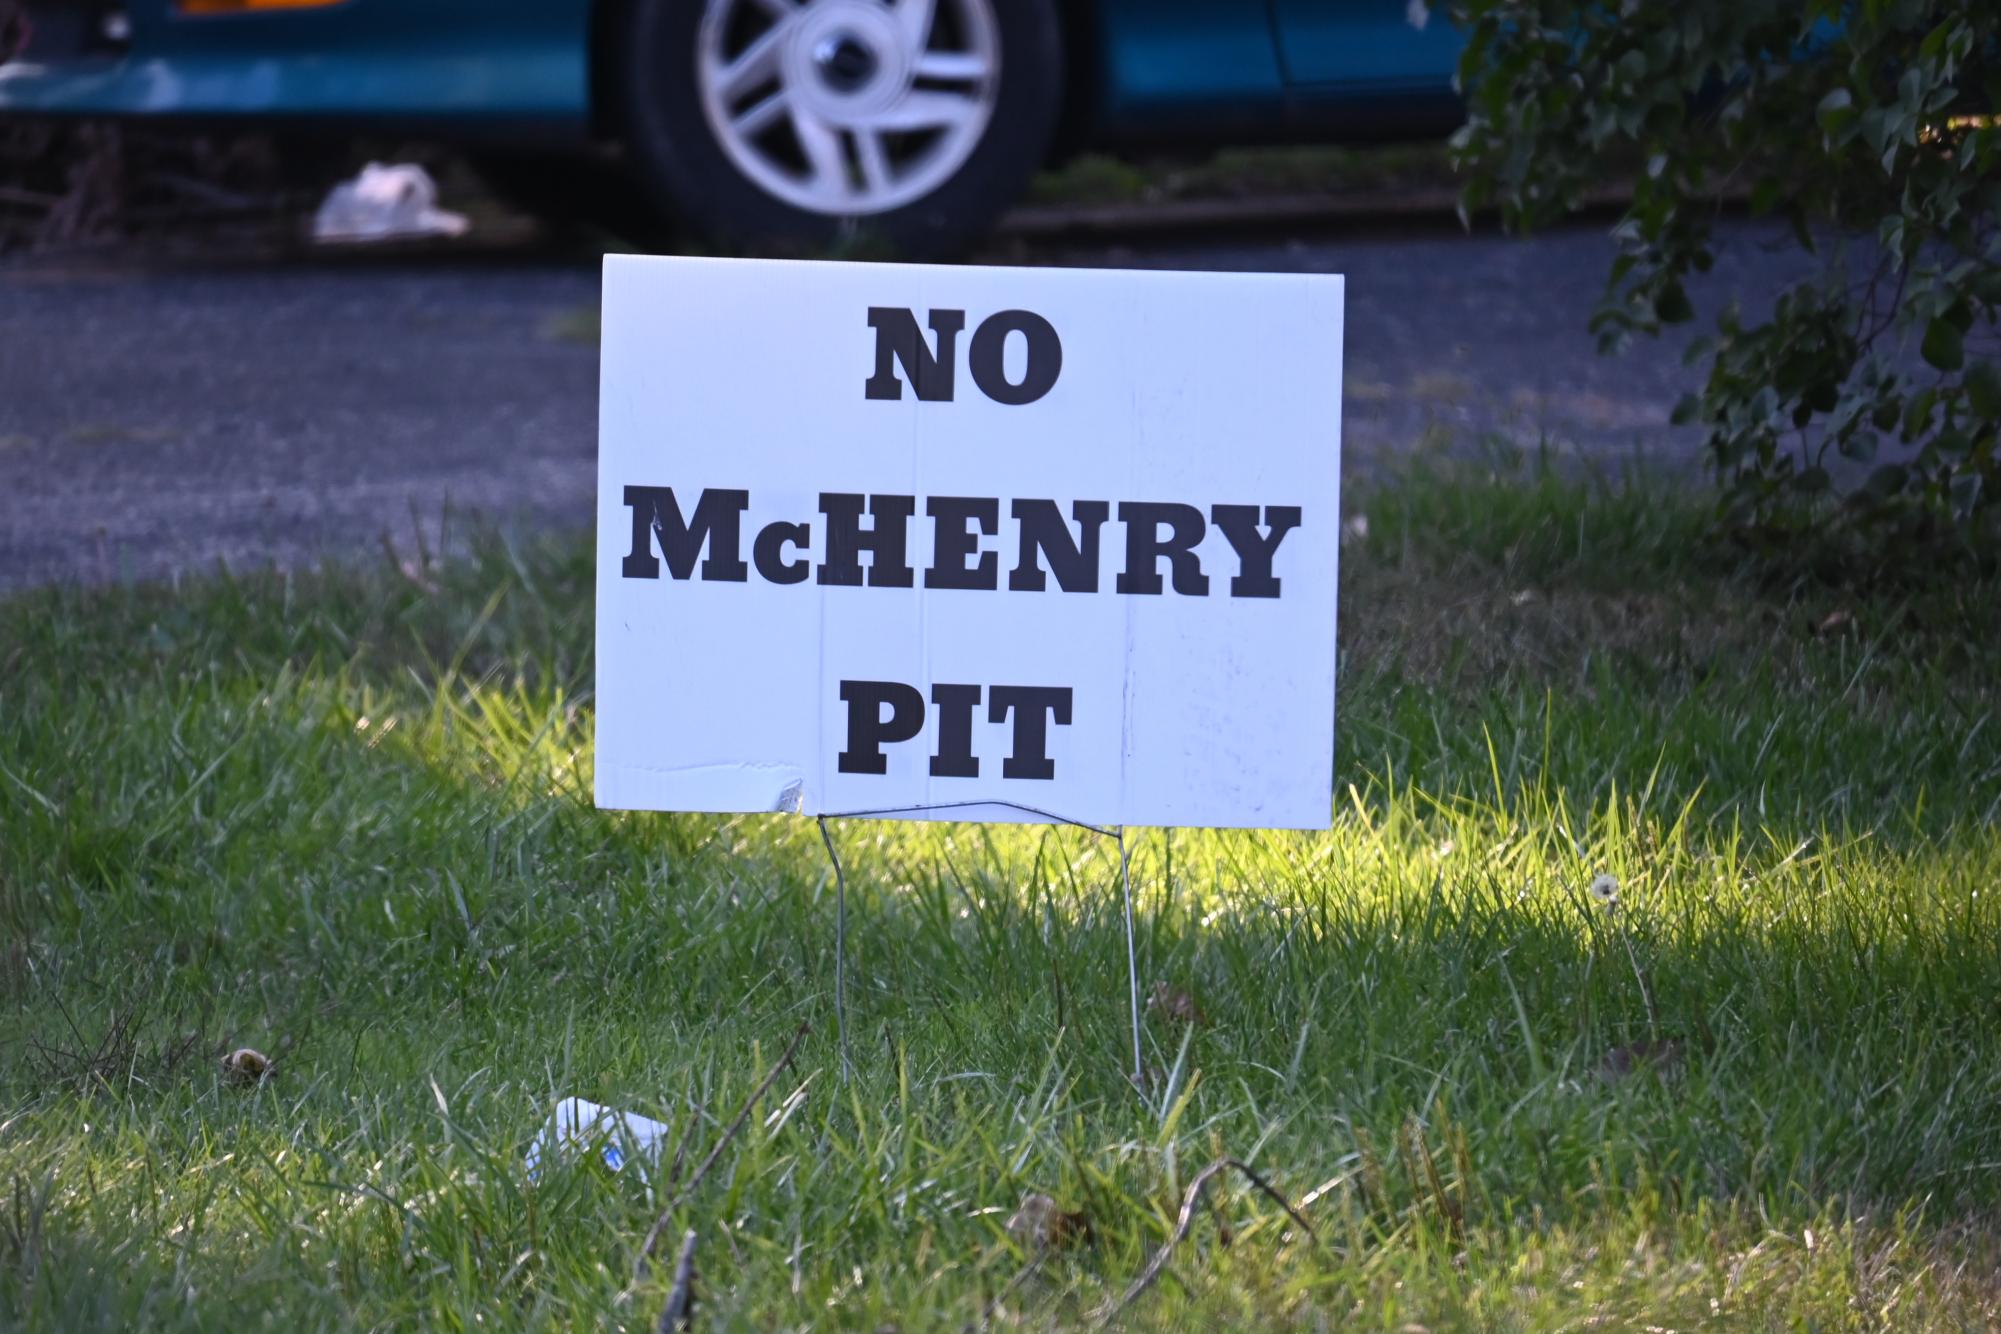 No McHenry Pit signs have been appearing in front of houses all over McHenry. There have been many city council meetings to discuss whether or not there will be a gravel pit behind the McHenry Outdoor Theater. 